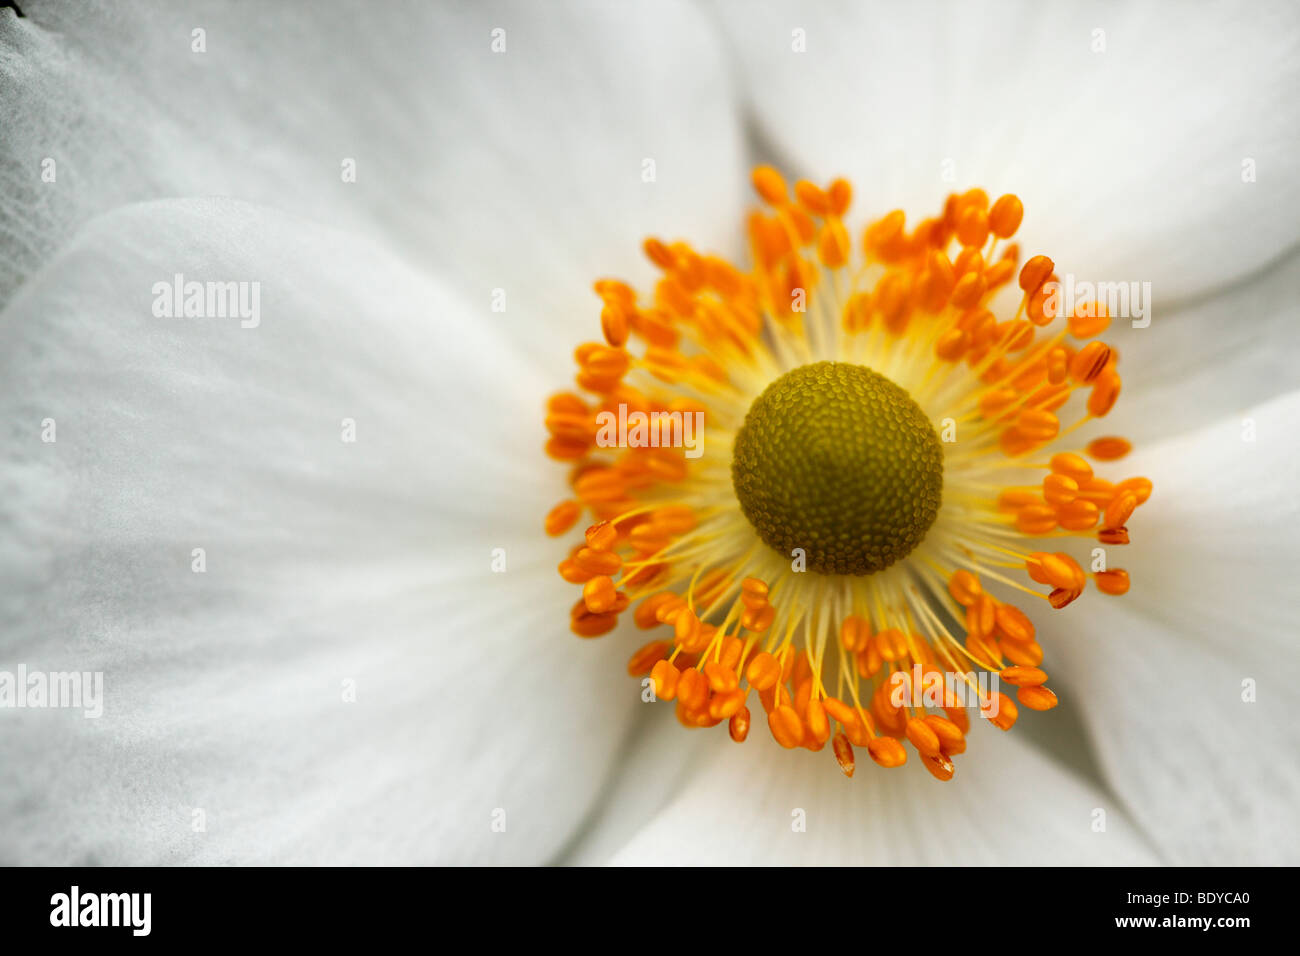 Close-up of a Japanese Anemone. Banque D'Images